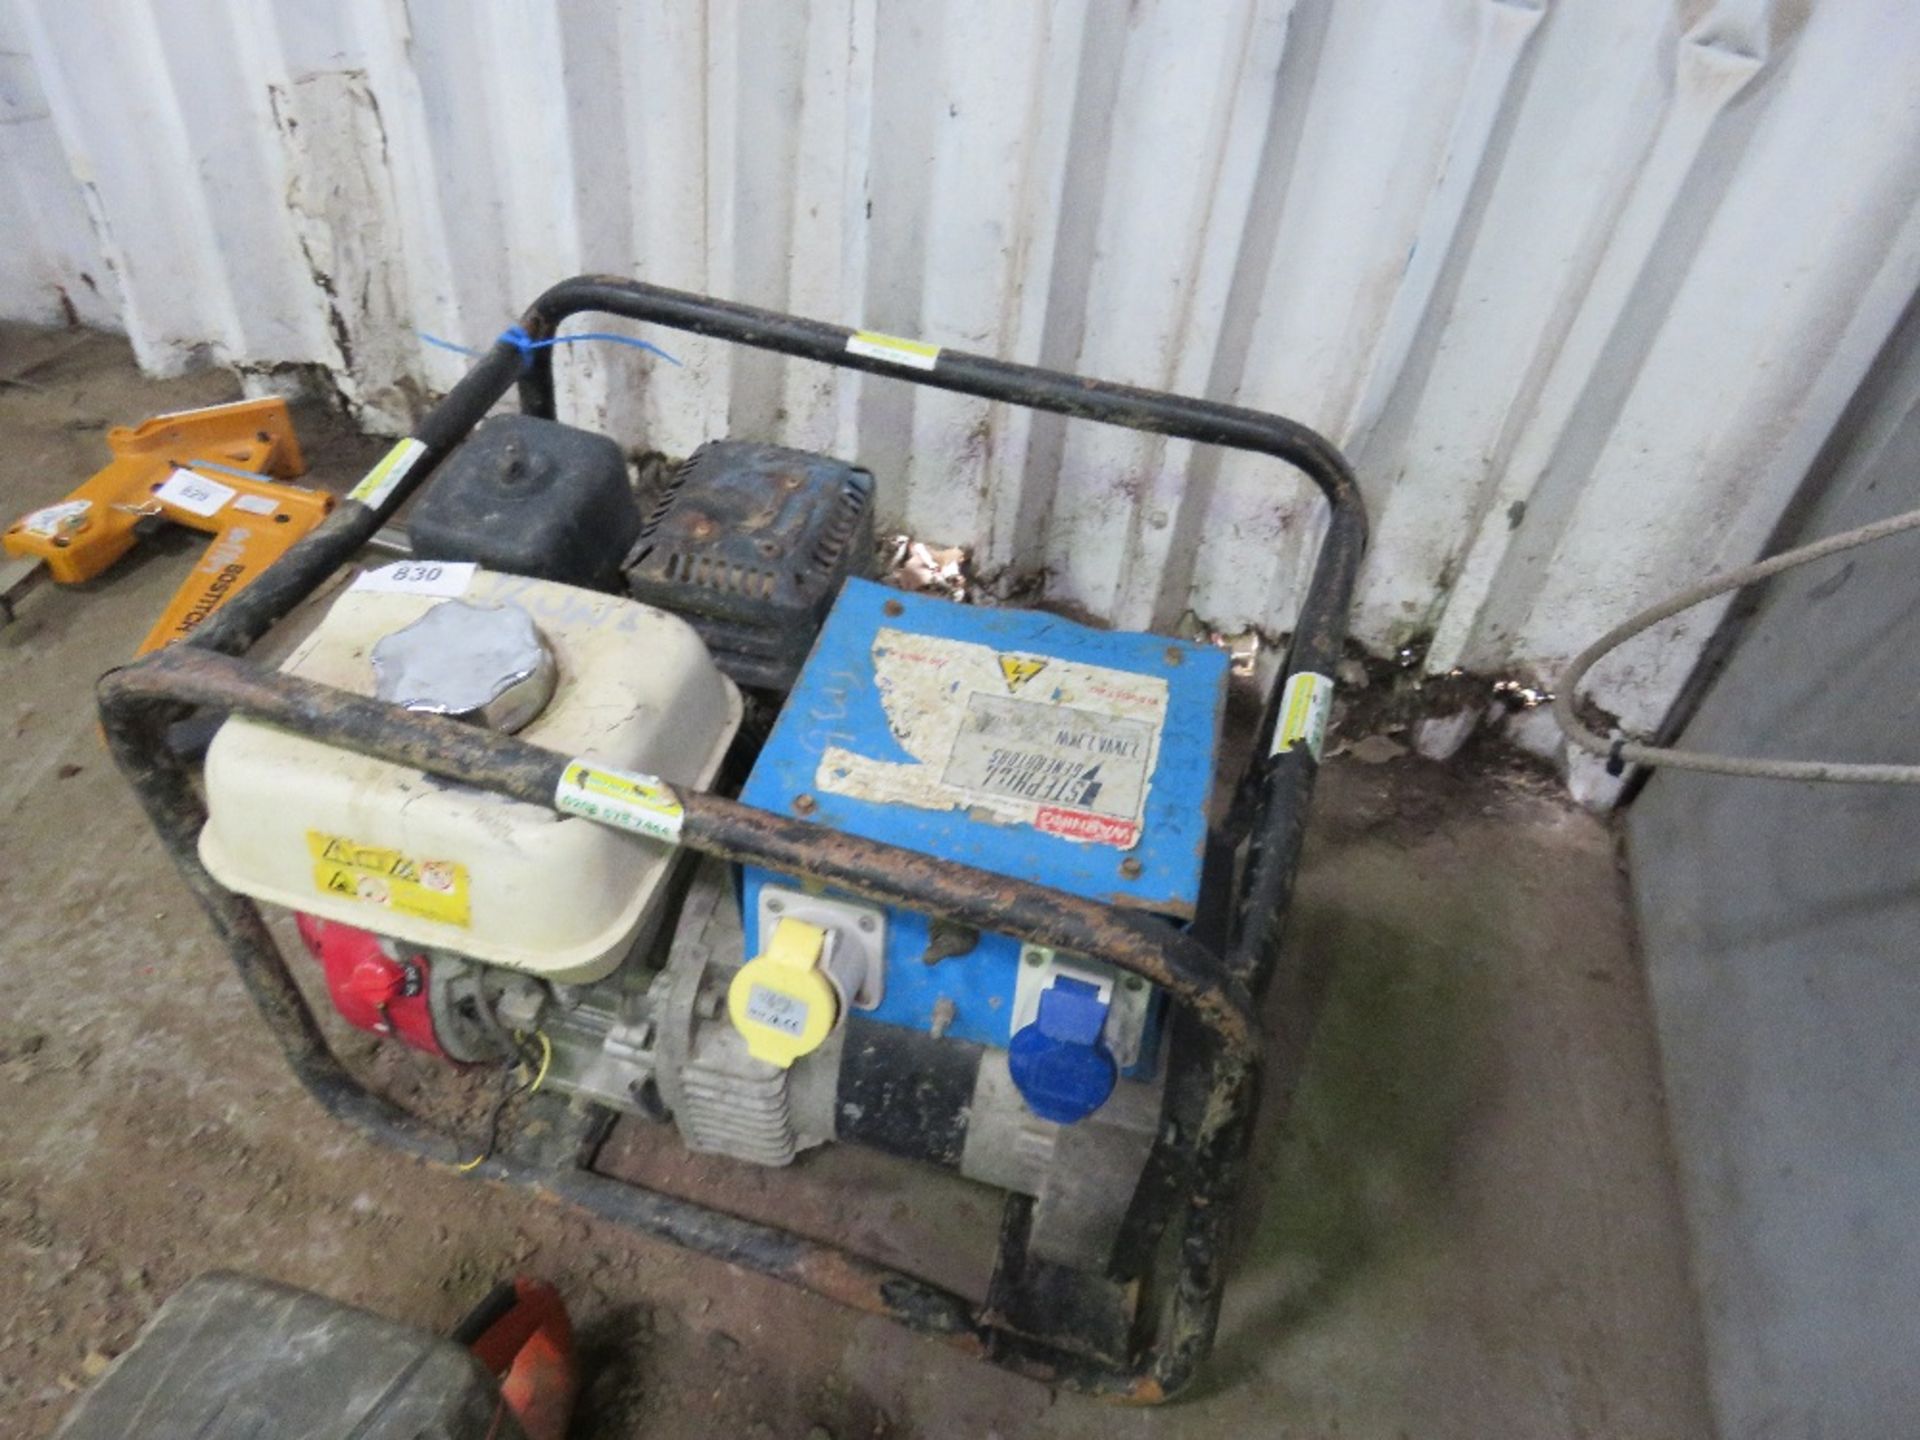 HONDA PETROL ENGINED GENERATOR. WHEN TESTED WAS SEEN TO RUN...OUTPUT UNTESTED